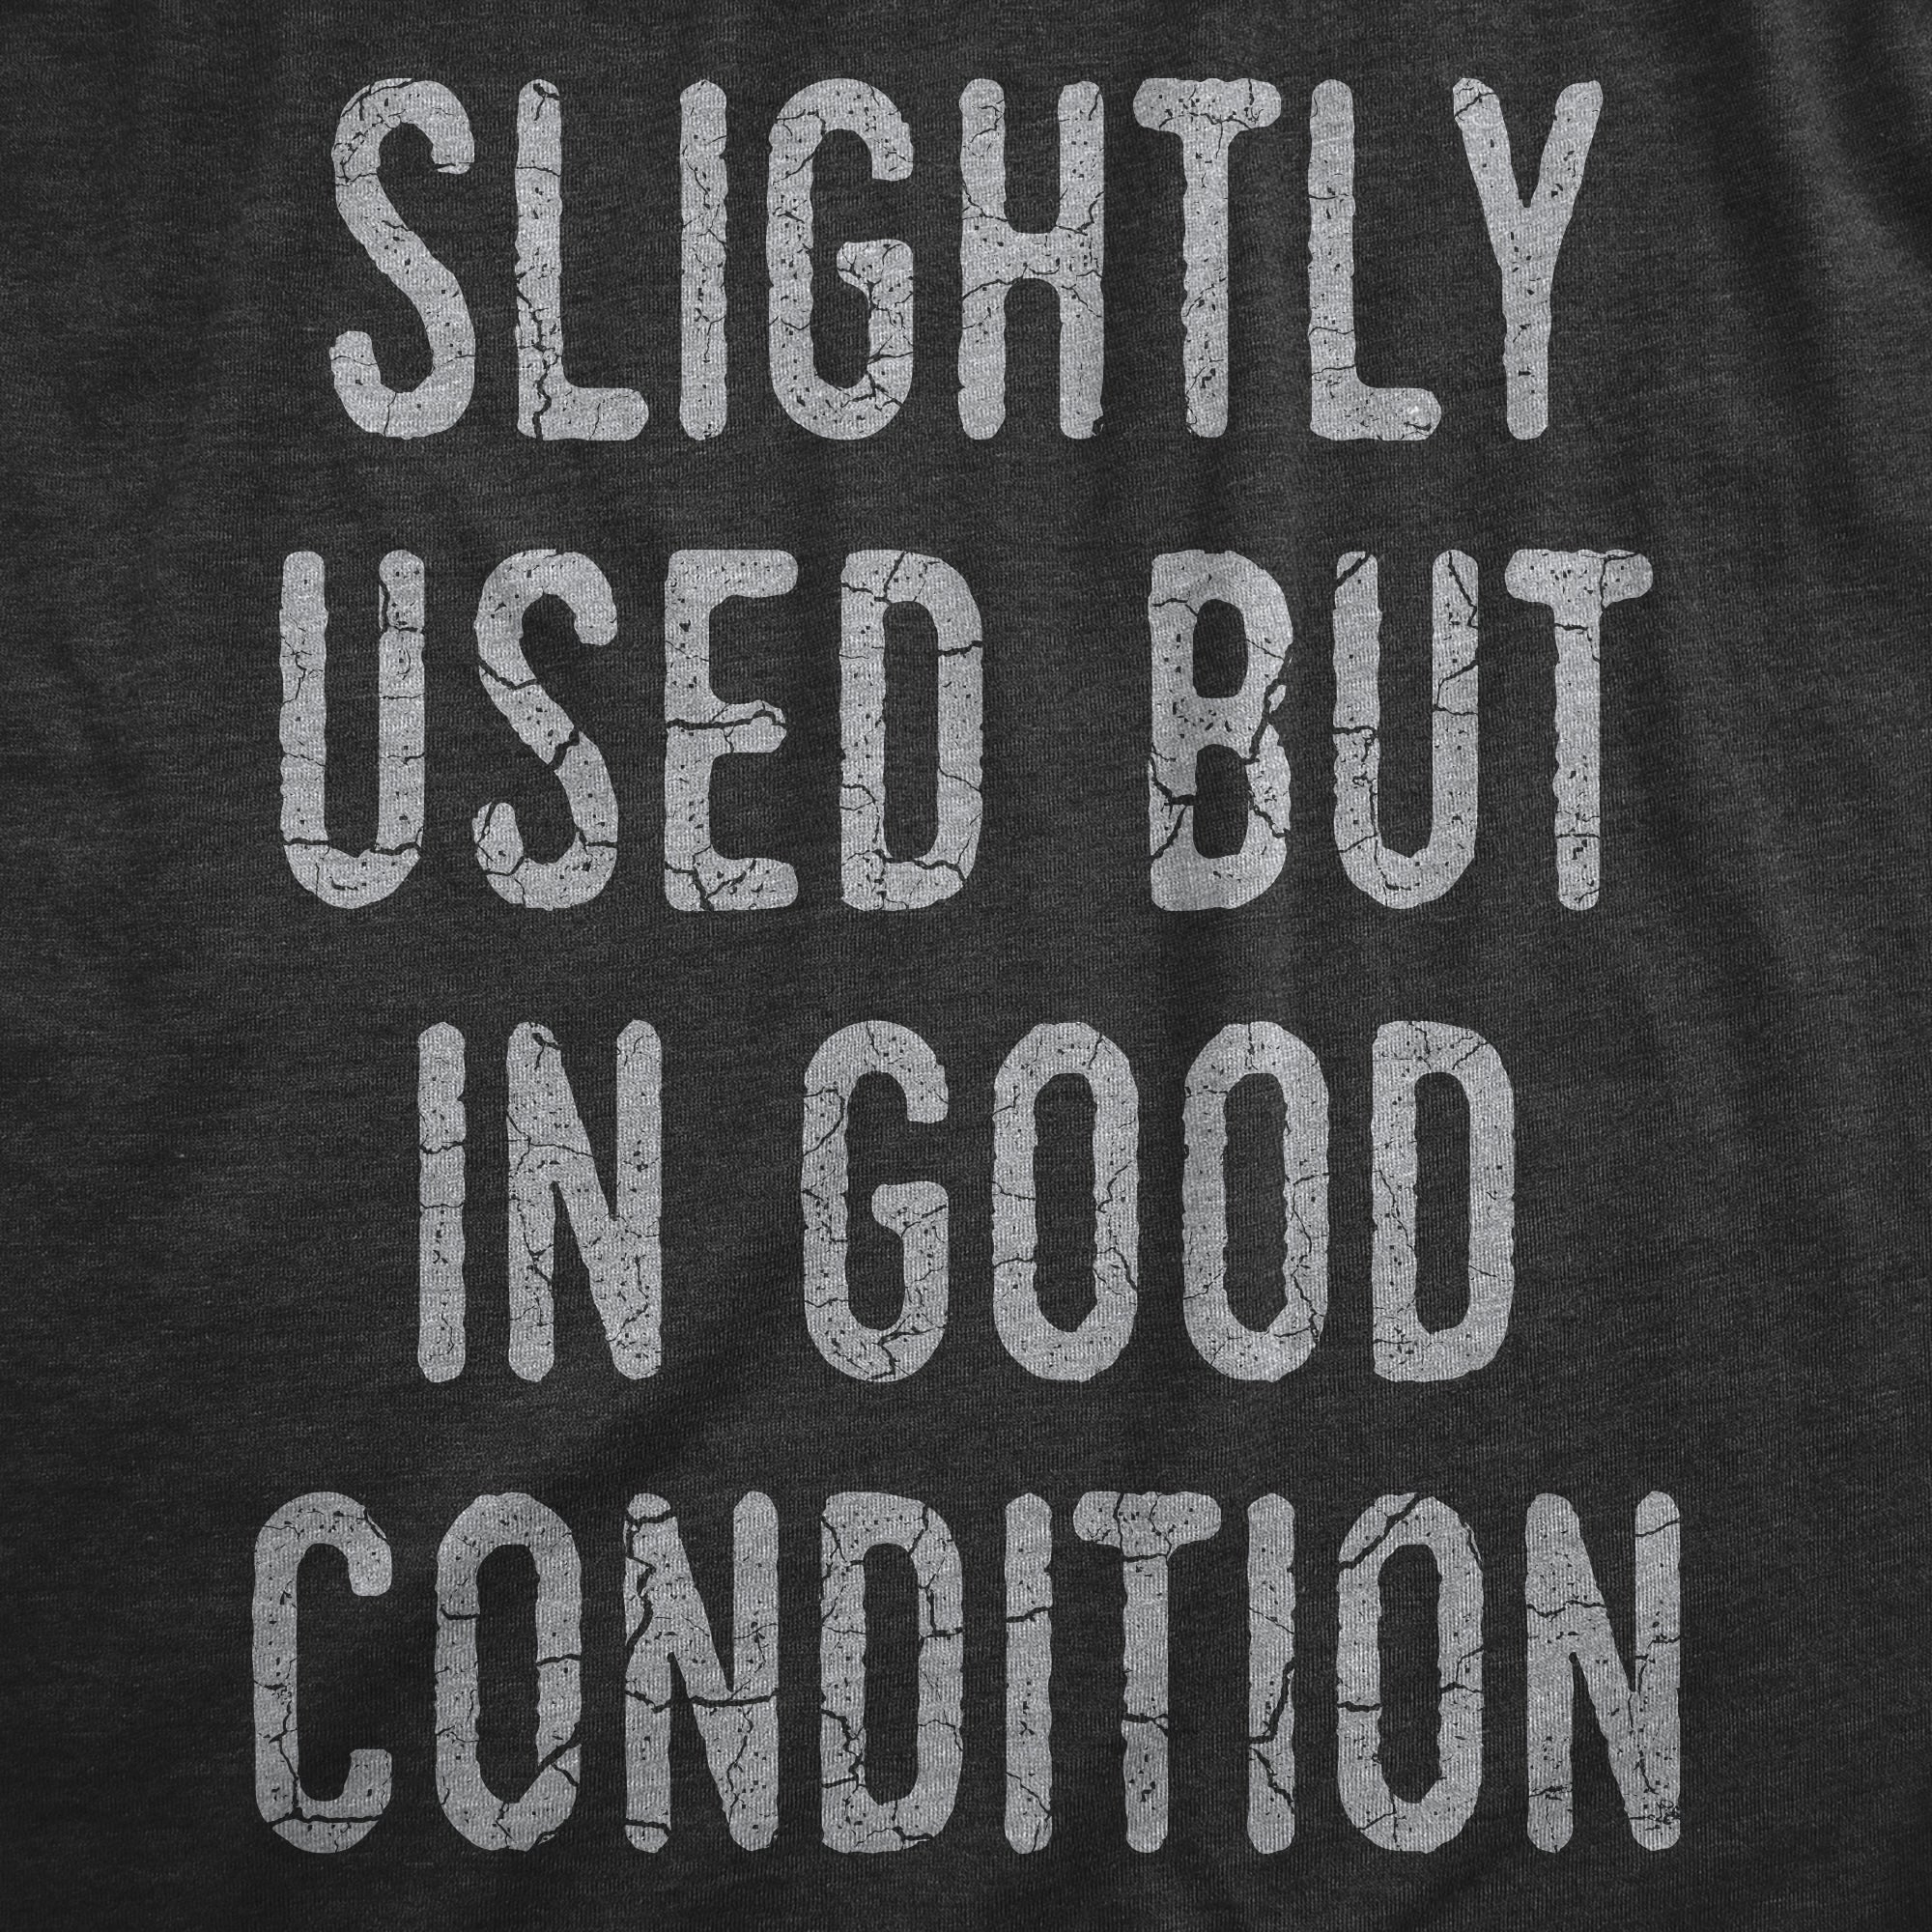 Funny Heather Black - USED Slightly Used But In Good Condition Mens T Shirt Nerdy Sarcastic Tee